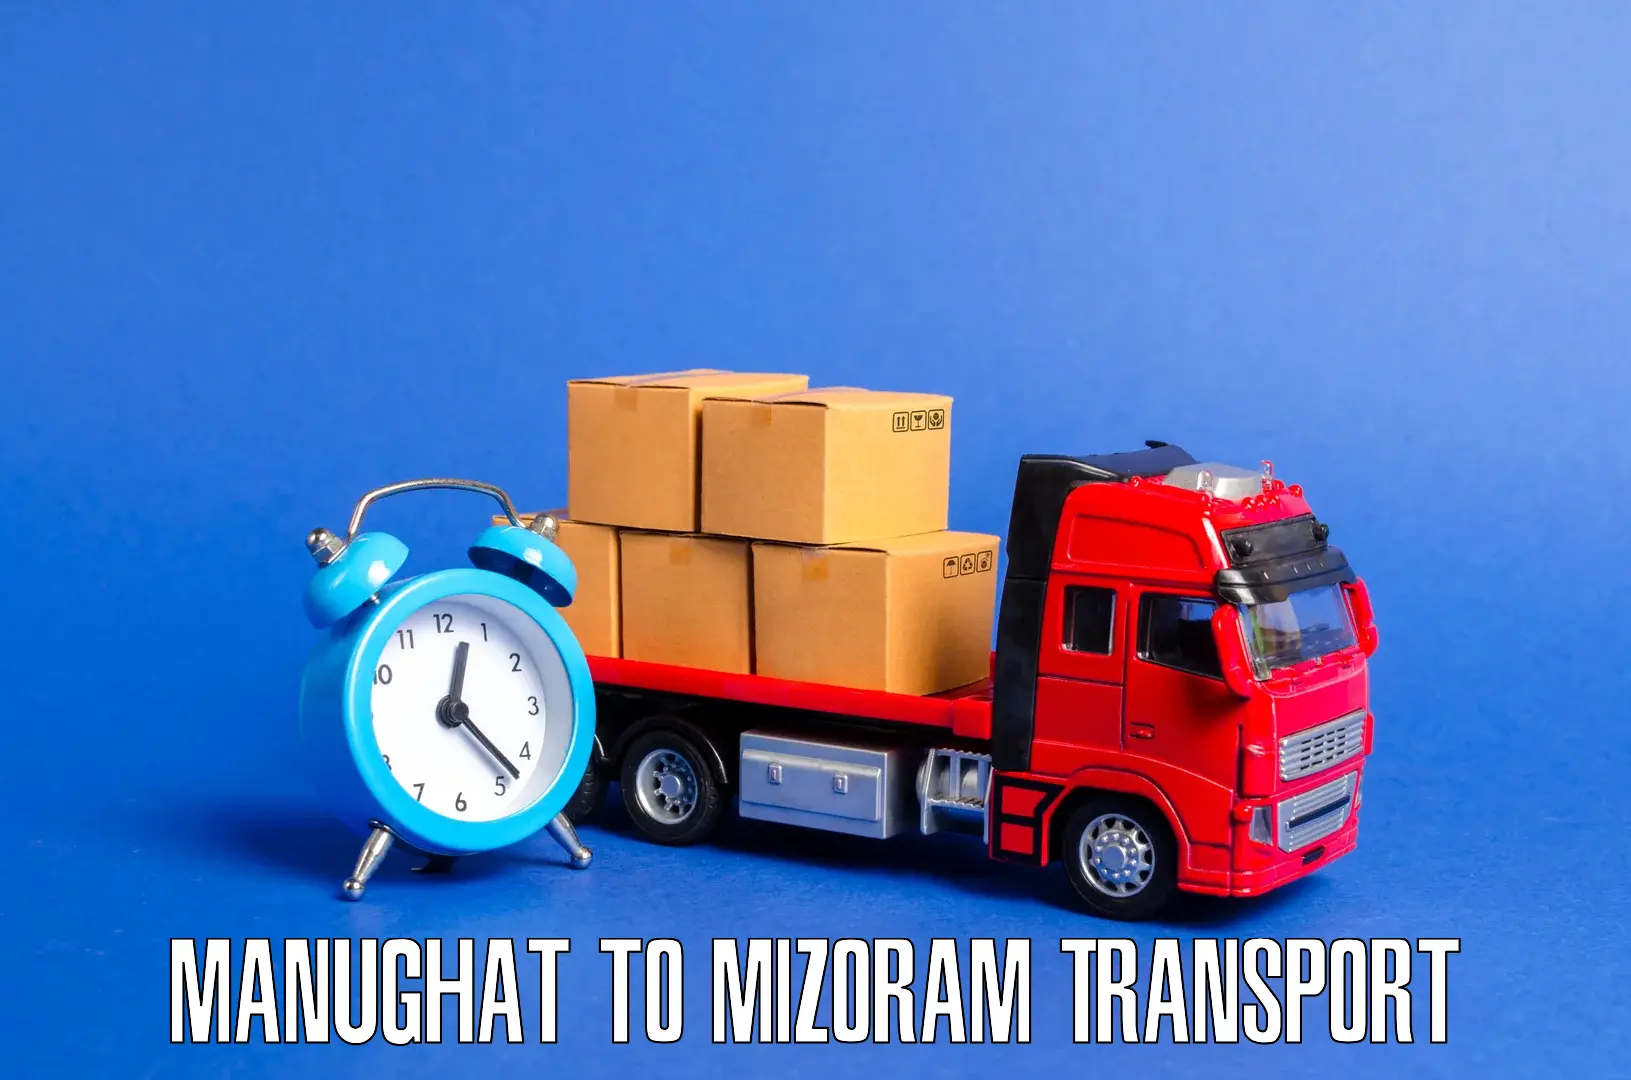 Vehicle transport services Manughat to Aizawl